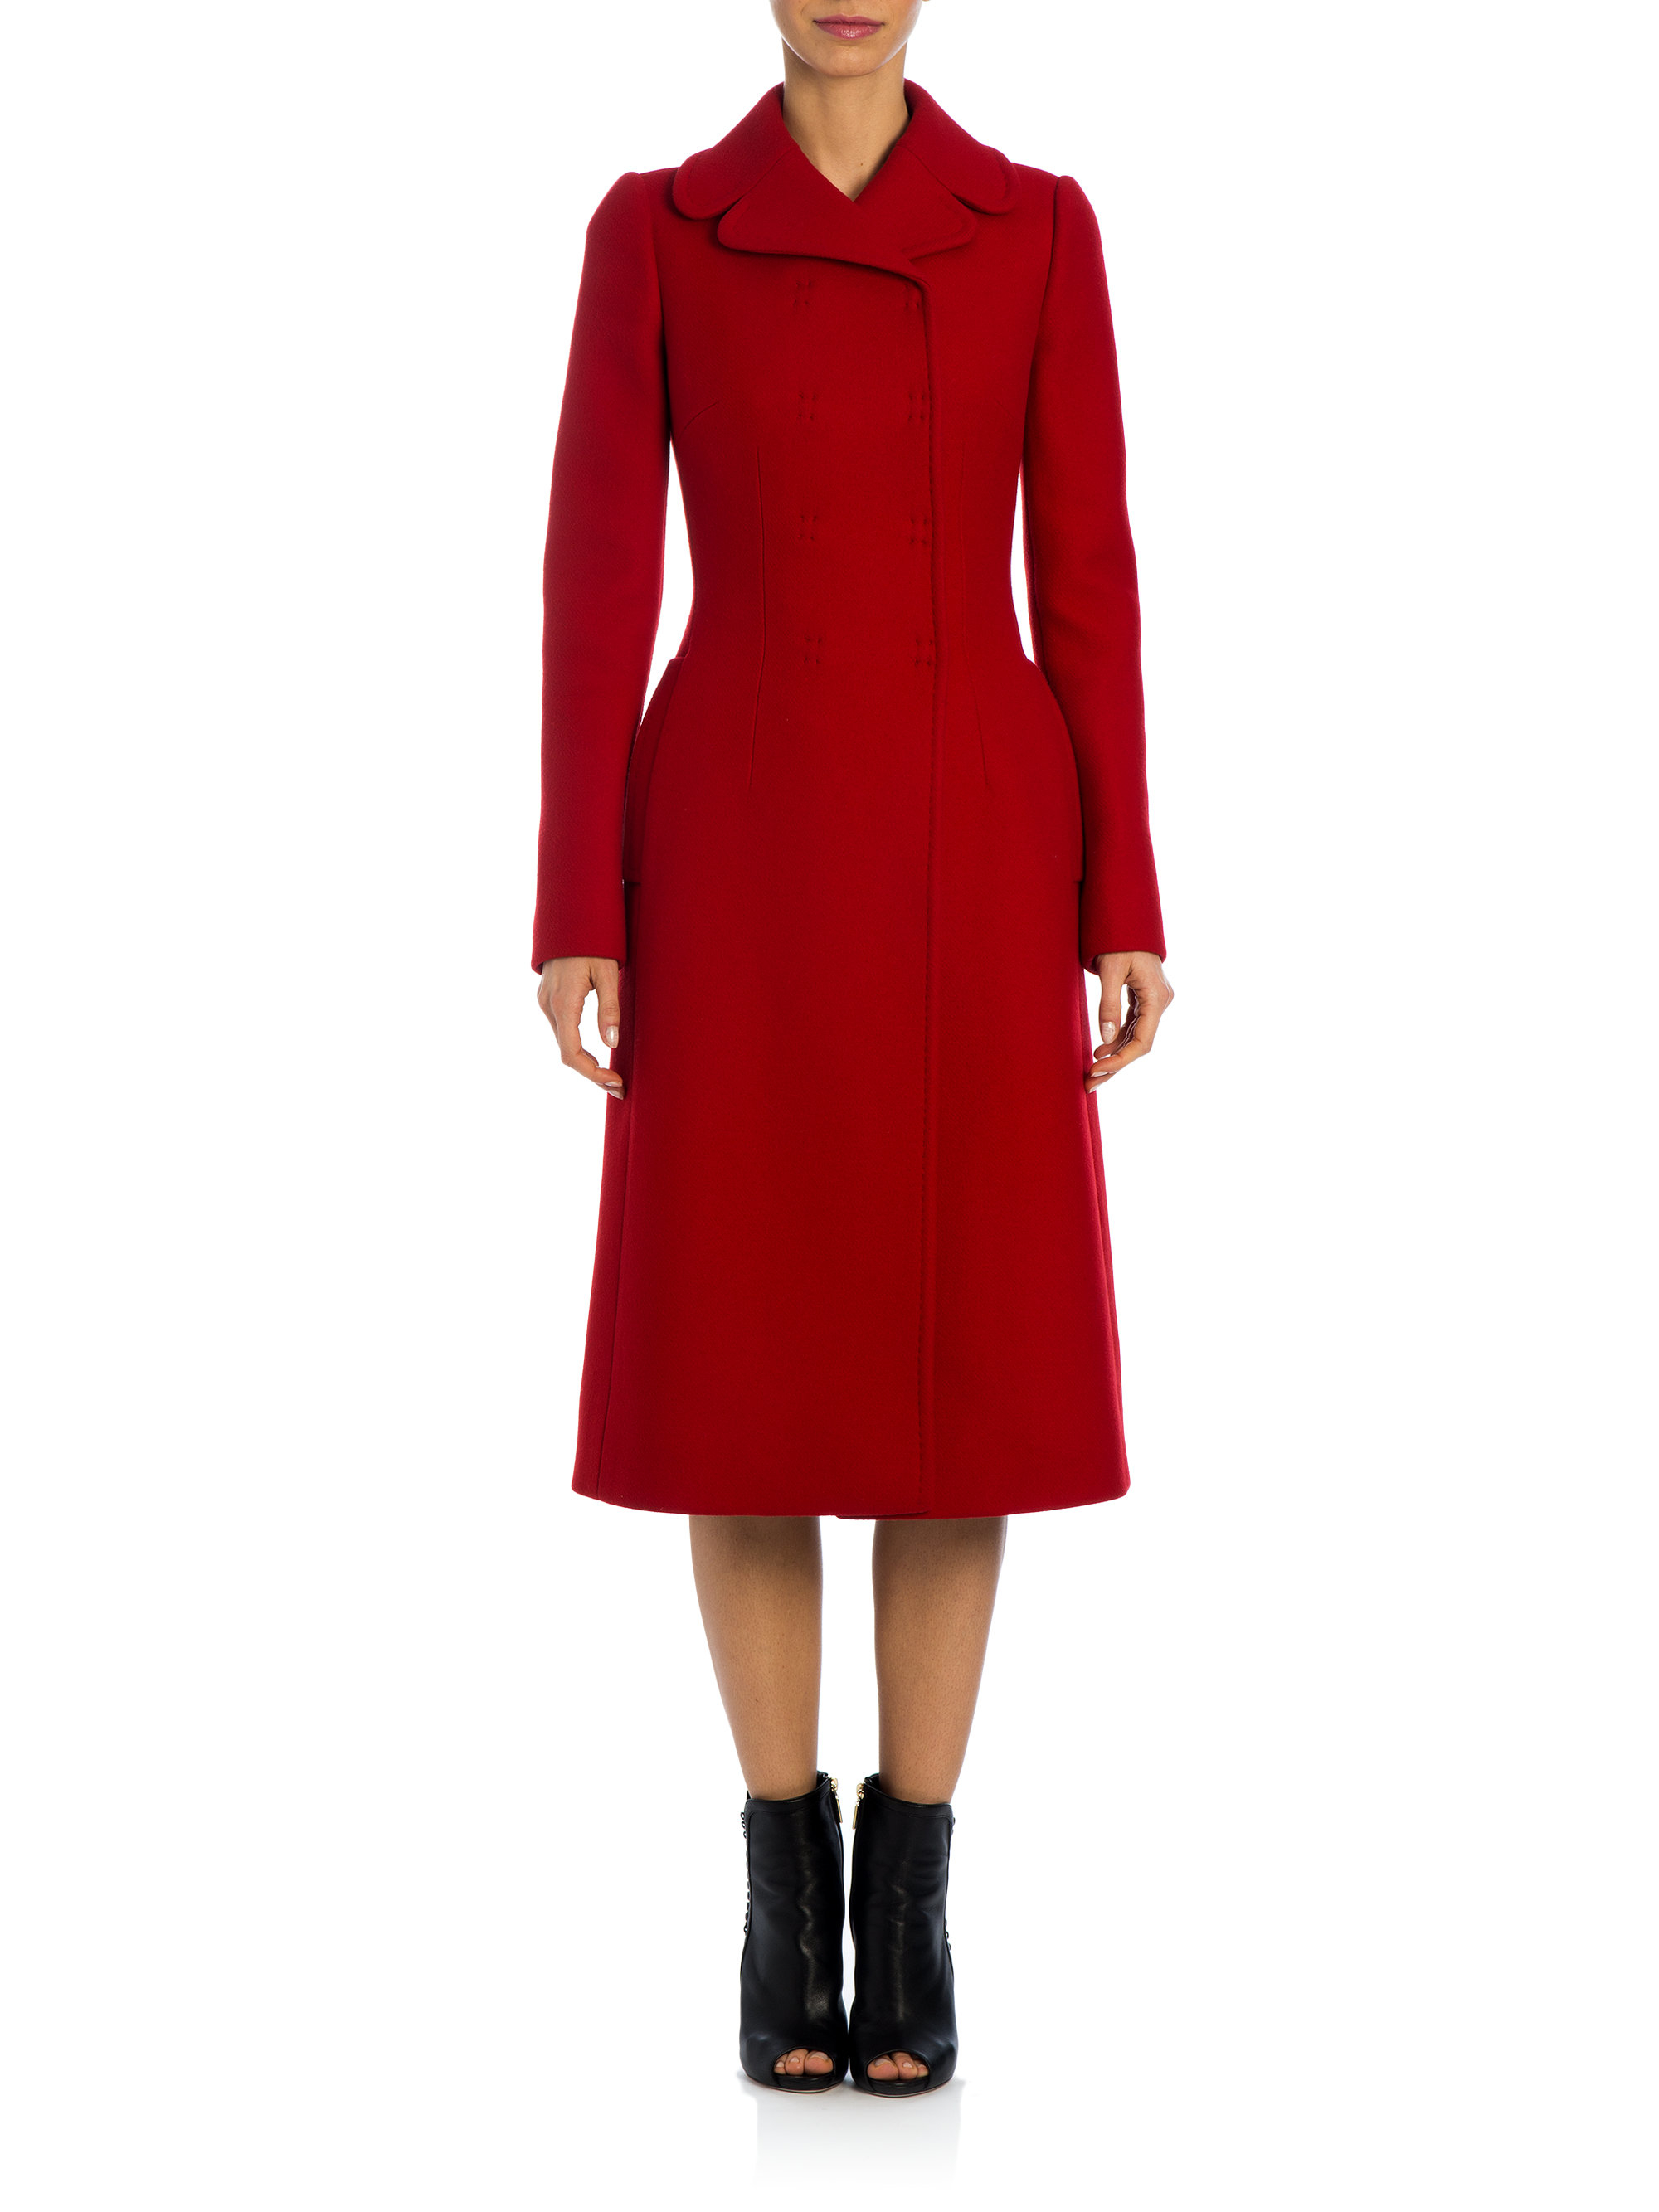 dolce and gabbana red coat